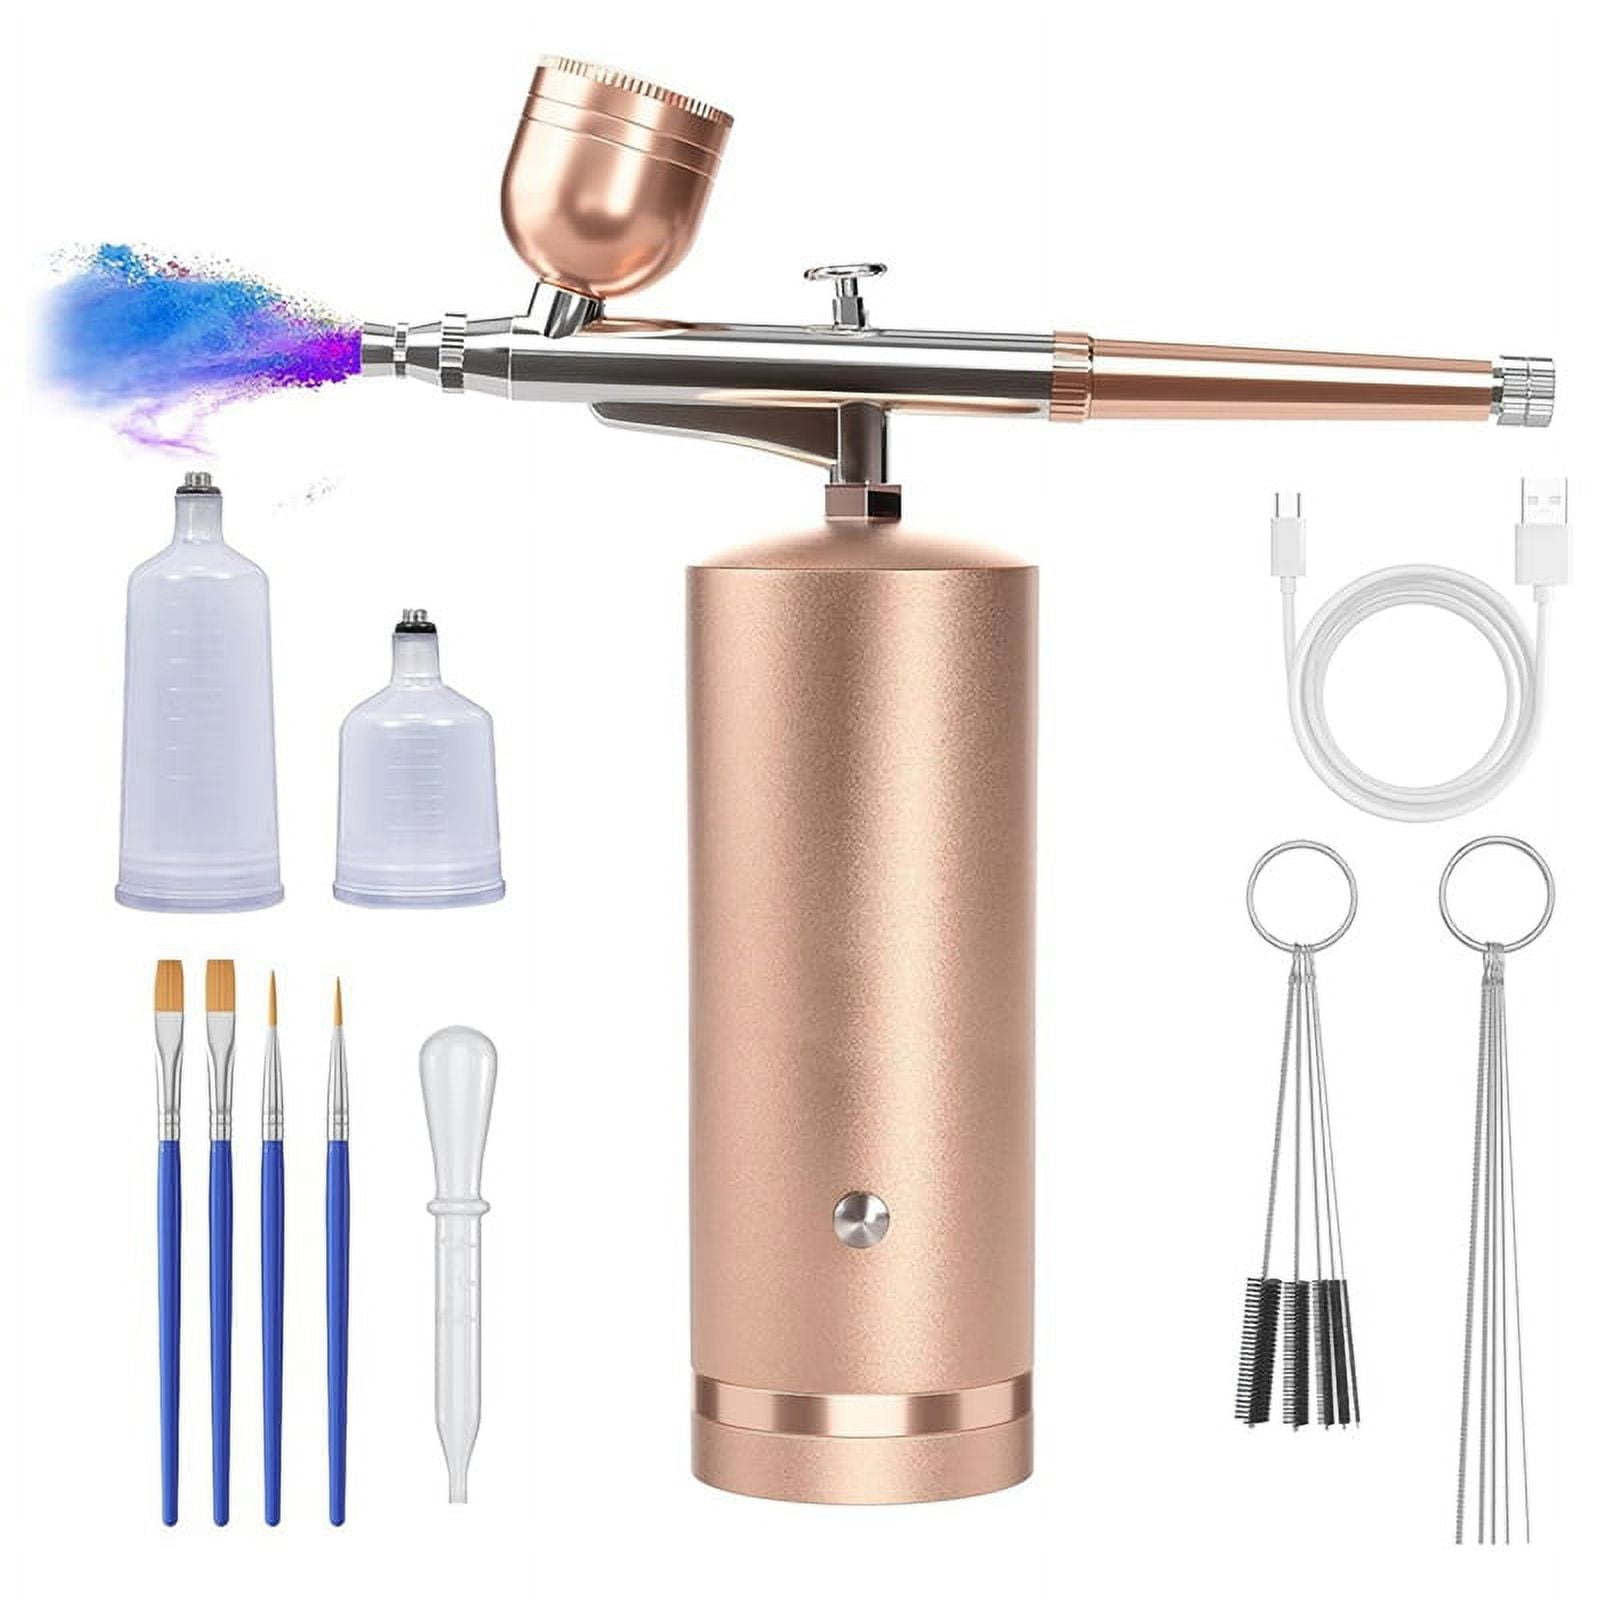 VEVOR Airbrush Kit, Portable Airbrush Set with Compressor, Airbrushing System Kit w/Multi-Purpose Dual-Action Gravity Feed Airbrushes, Art Nail